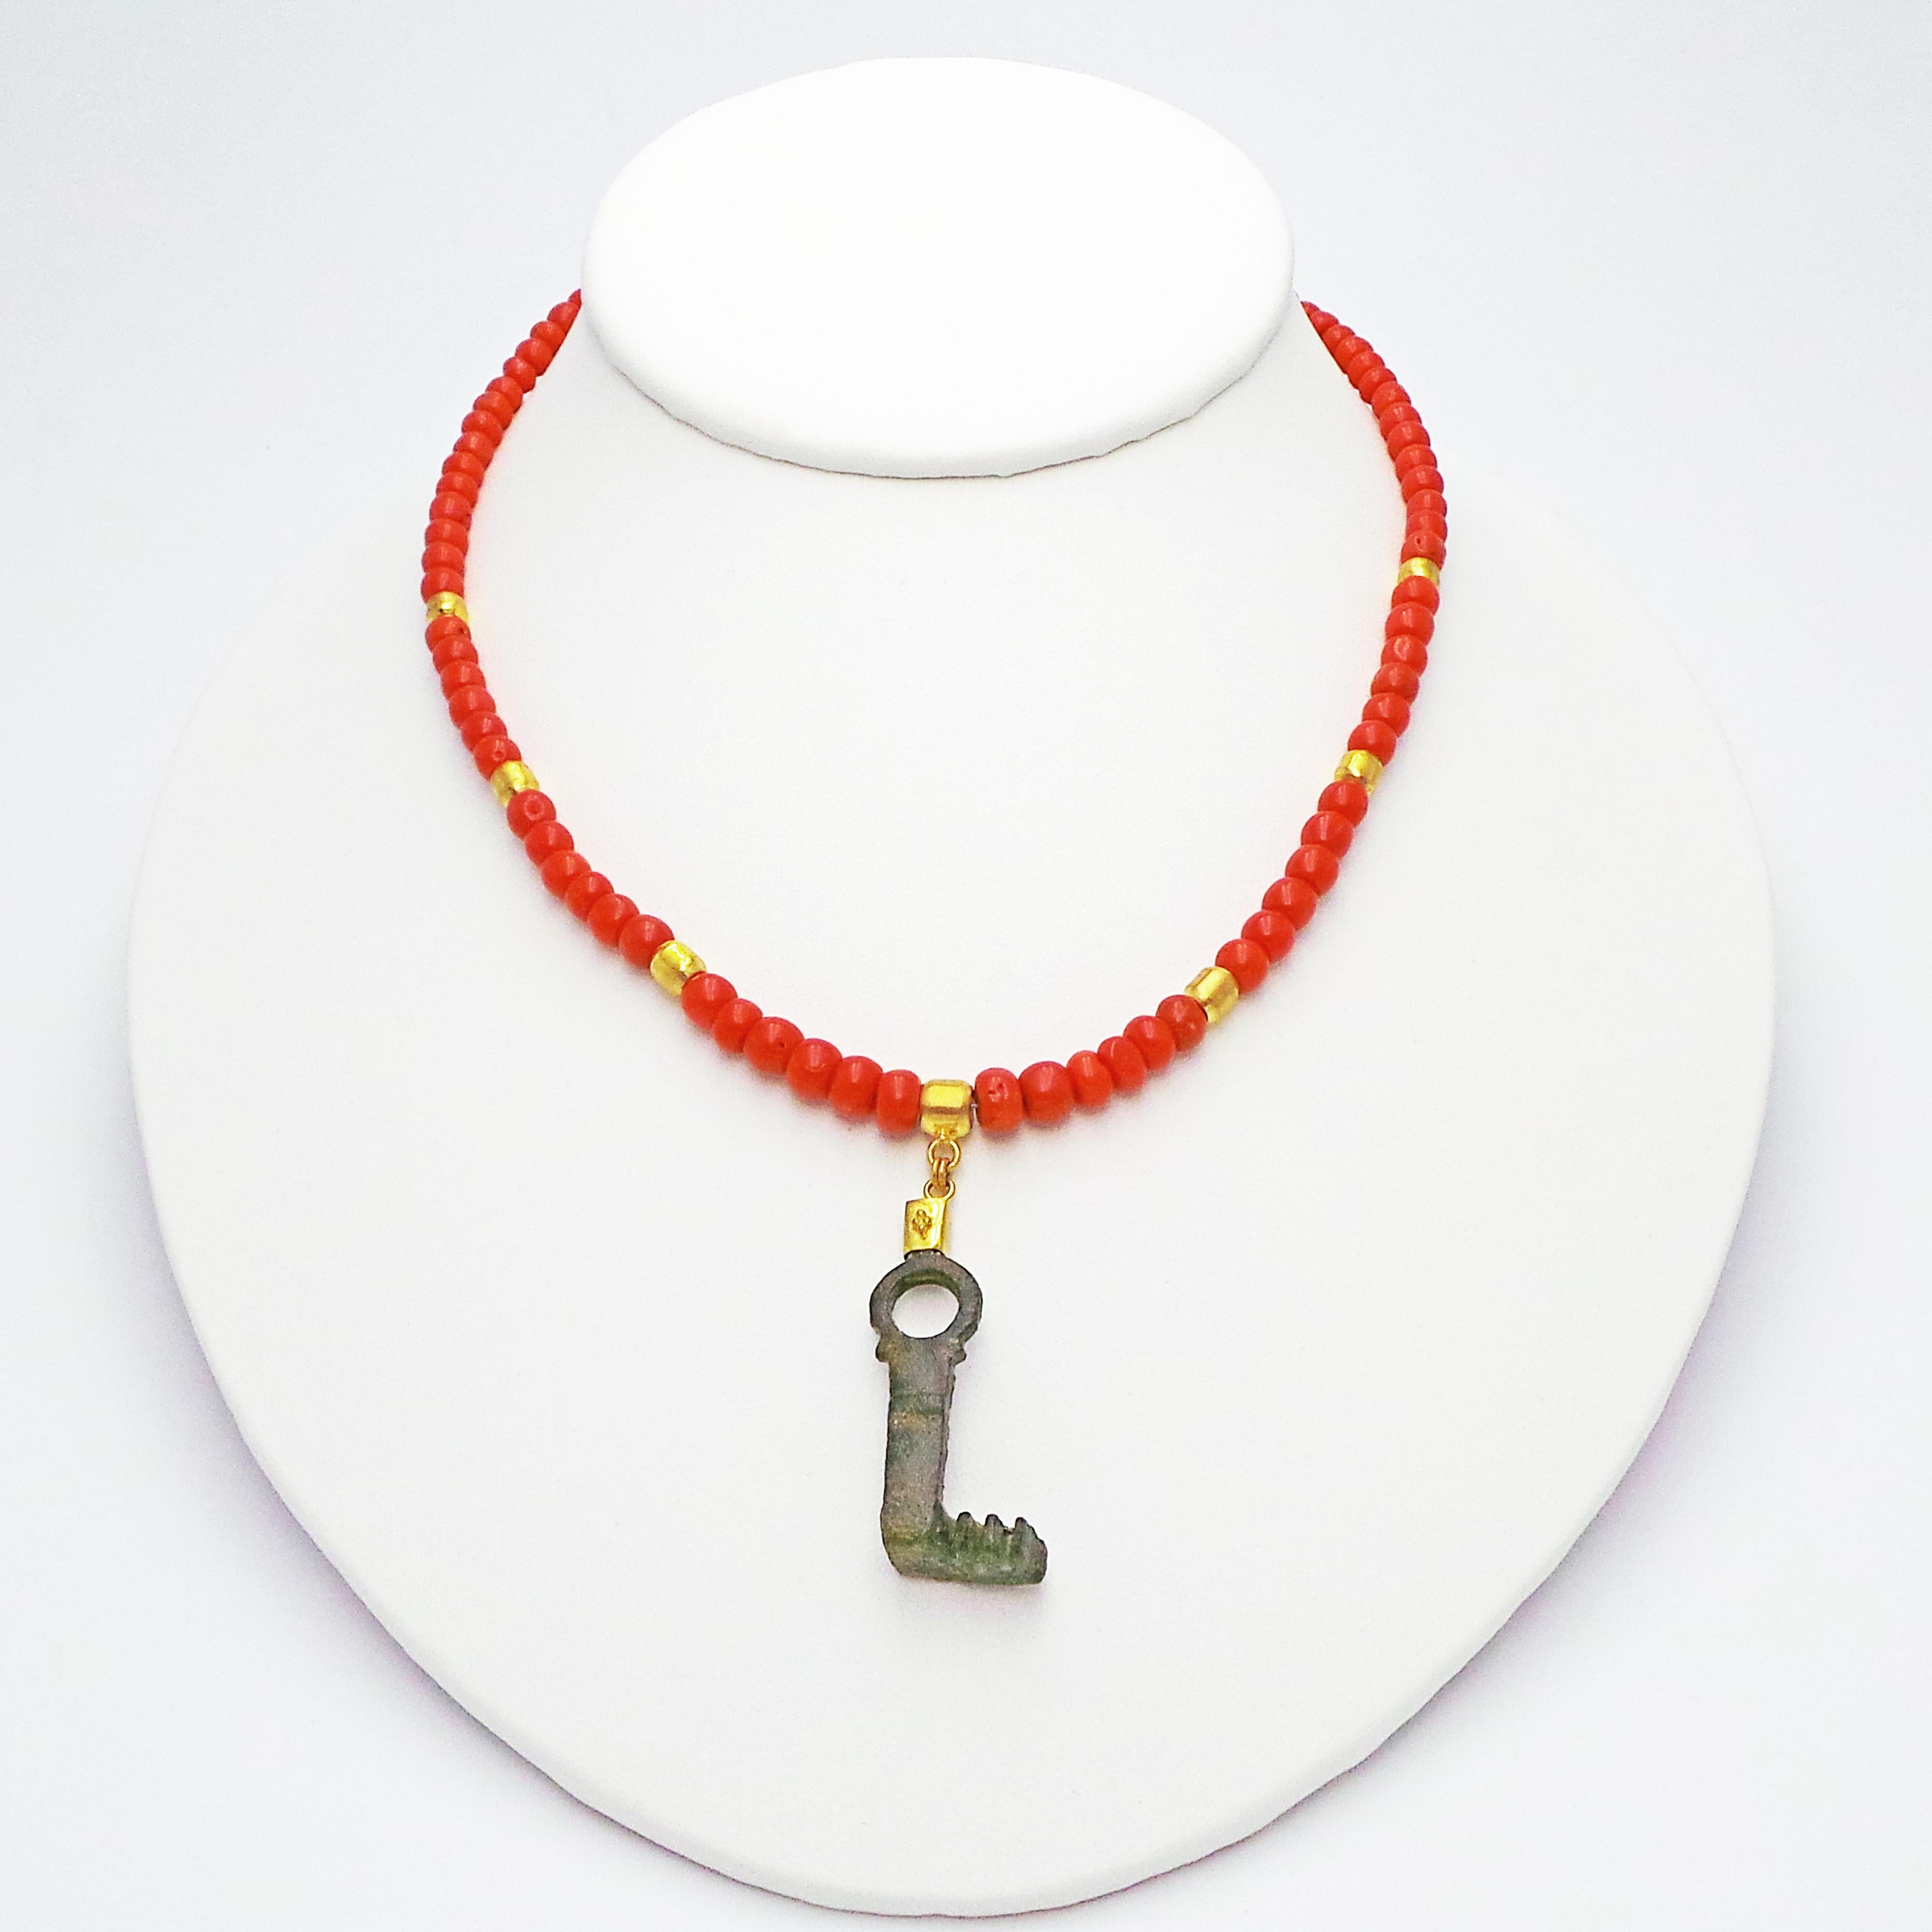 Contemporary Authentic Ancient Roman Bronze Key and Gold Pendant on Coral Bead Necklace For Sale